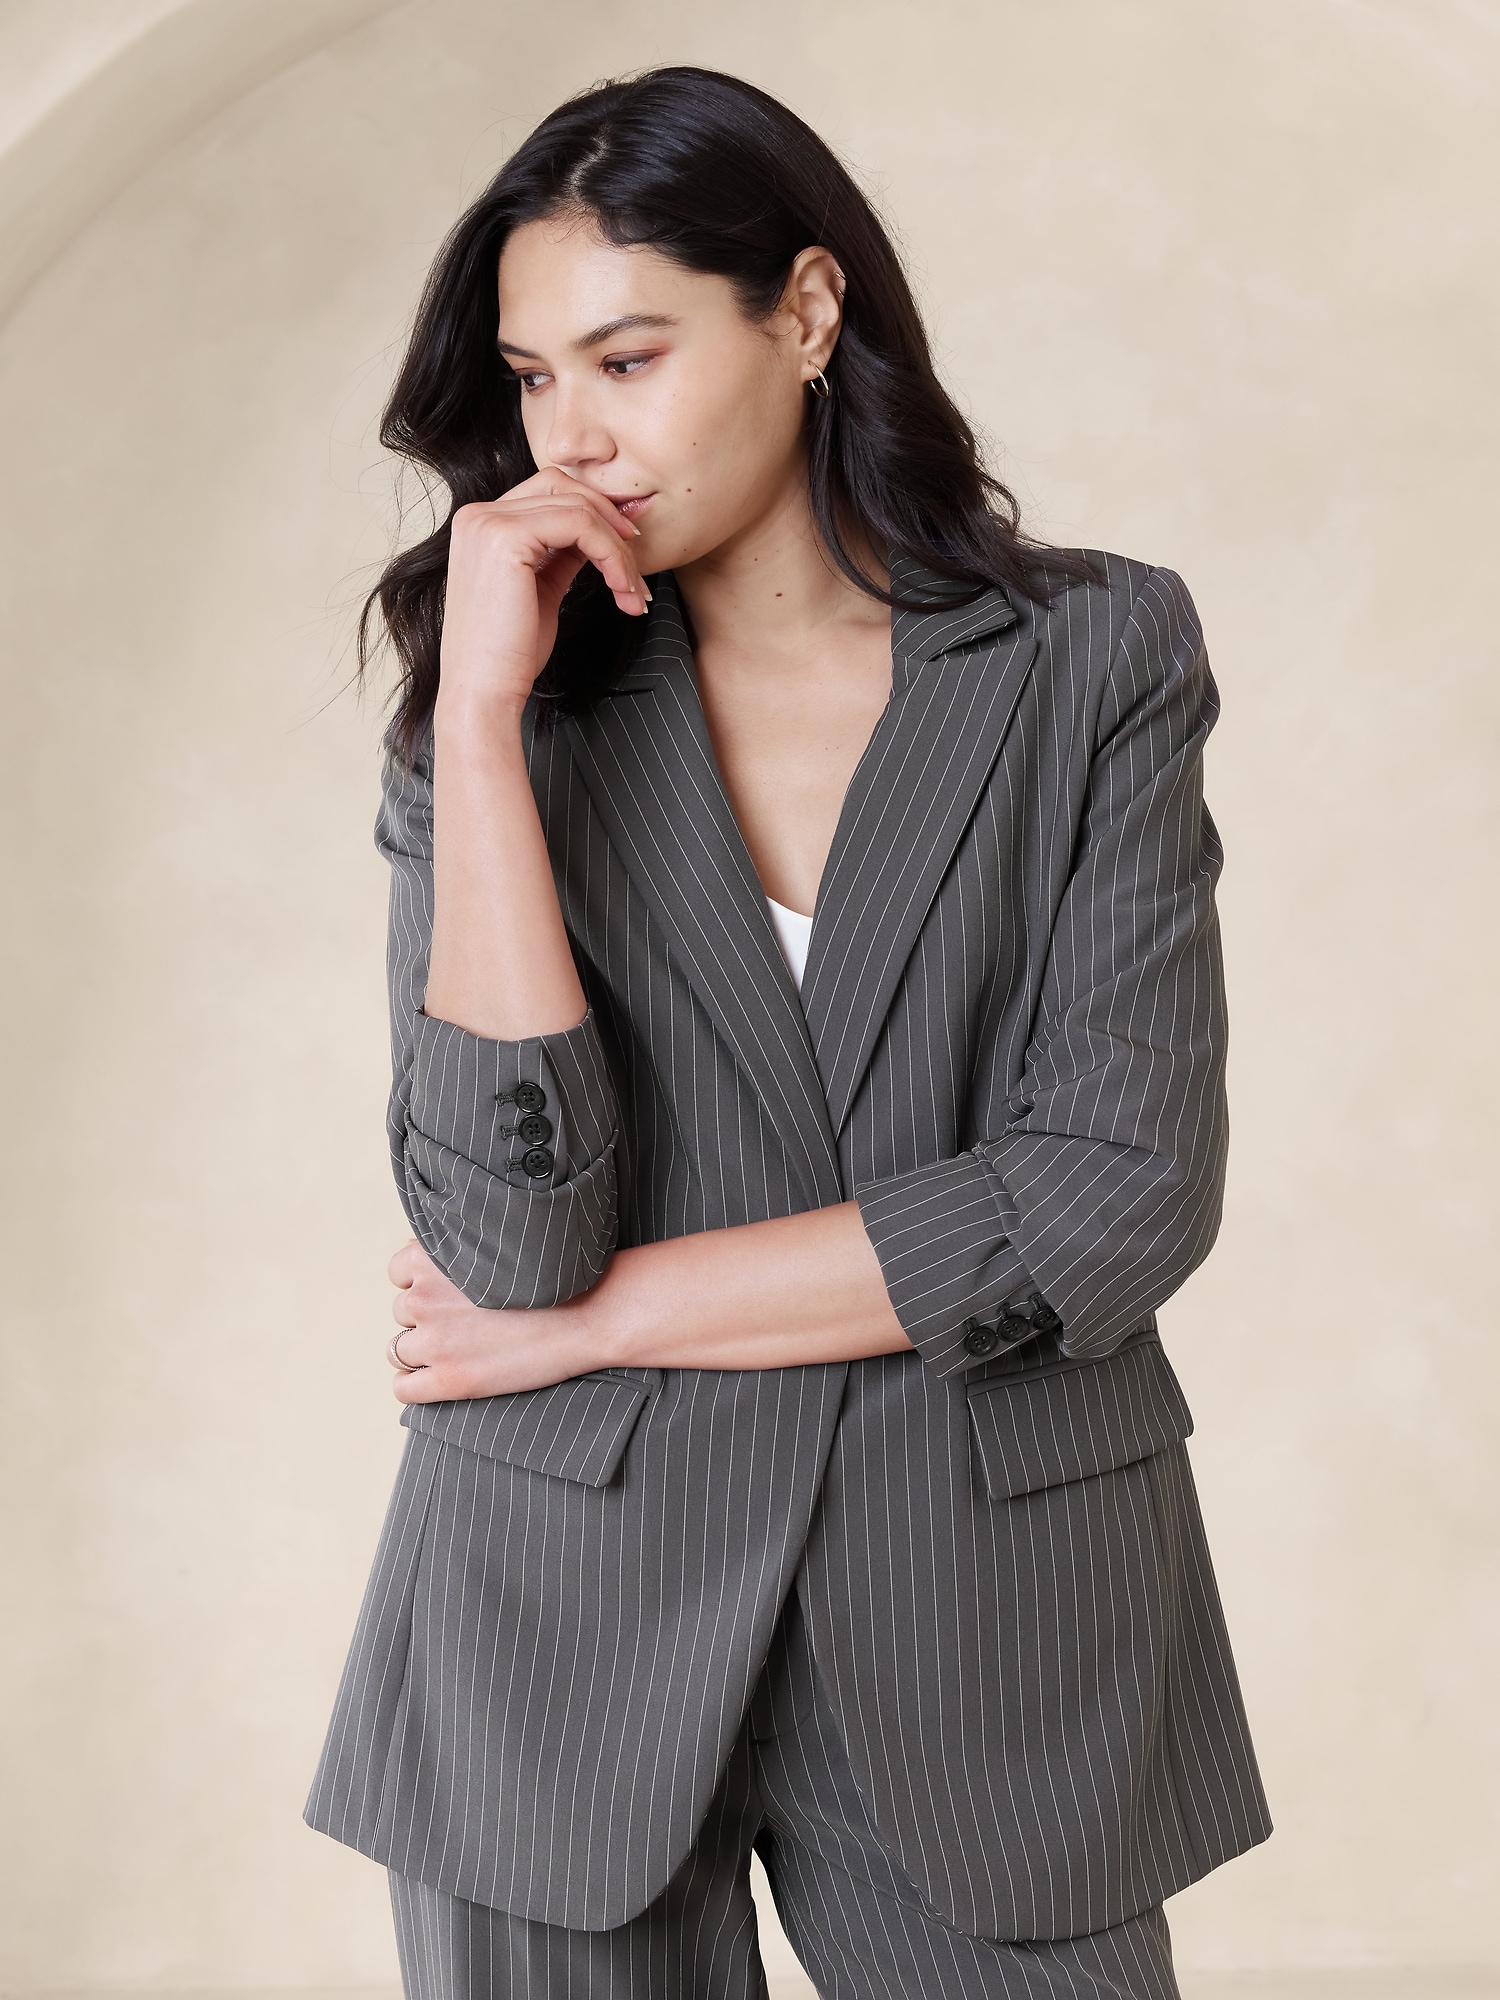 Slim Fit Purple Pinstripe Blazer Suit For Women Perfect For Evening  Parties, Proms, And Office Wear Two Button Tuxedo Set In With Jacket And  Pants From Foreverbridal, $90.46 | DHgate.Com